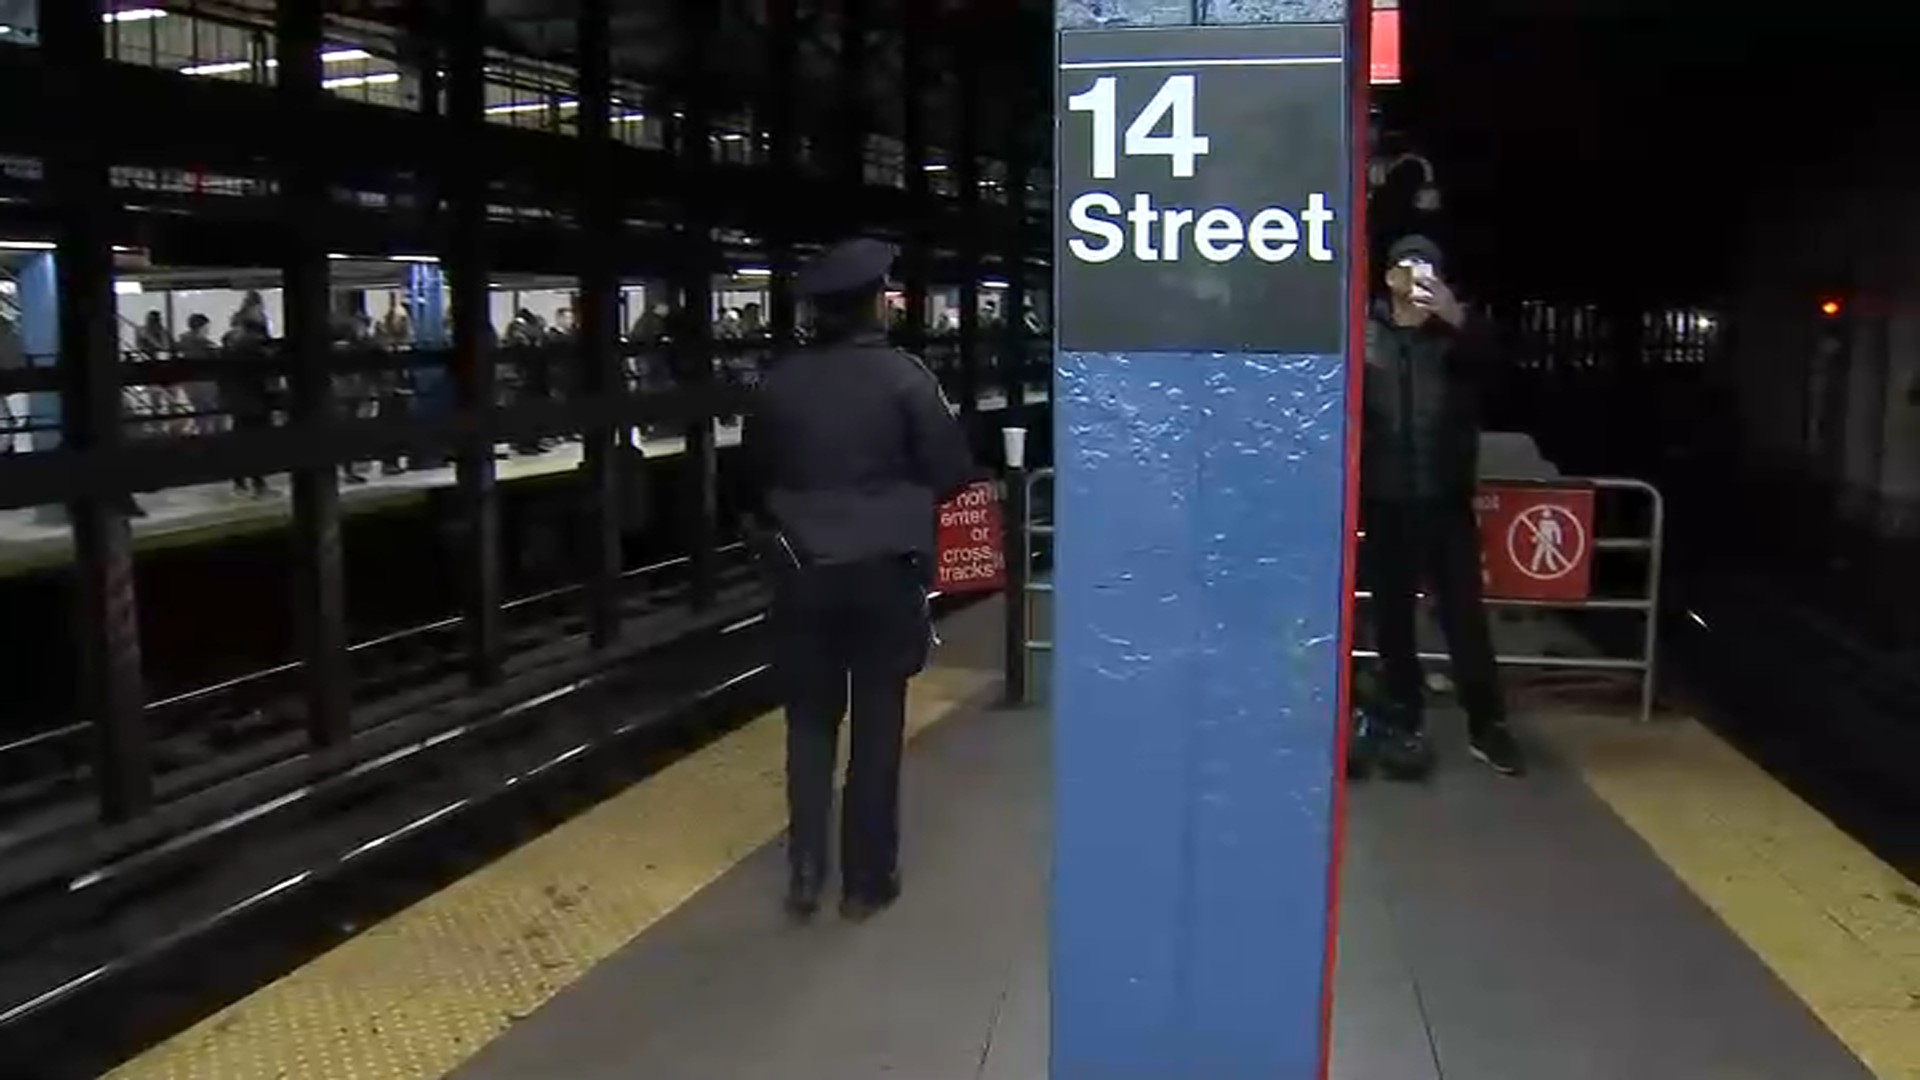 Woman Rescued After She's Pushed Onto Subway Tracks: Sources